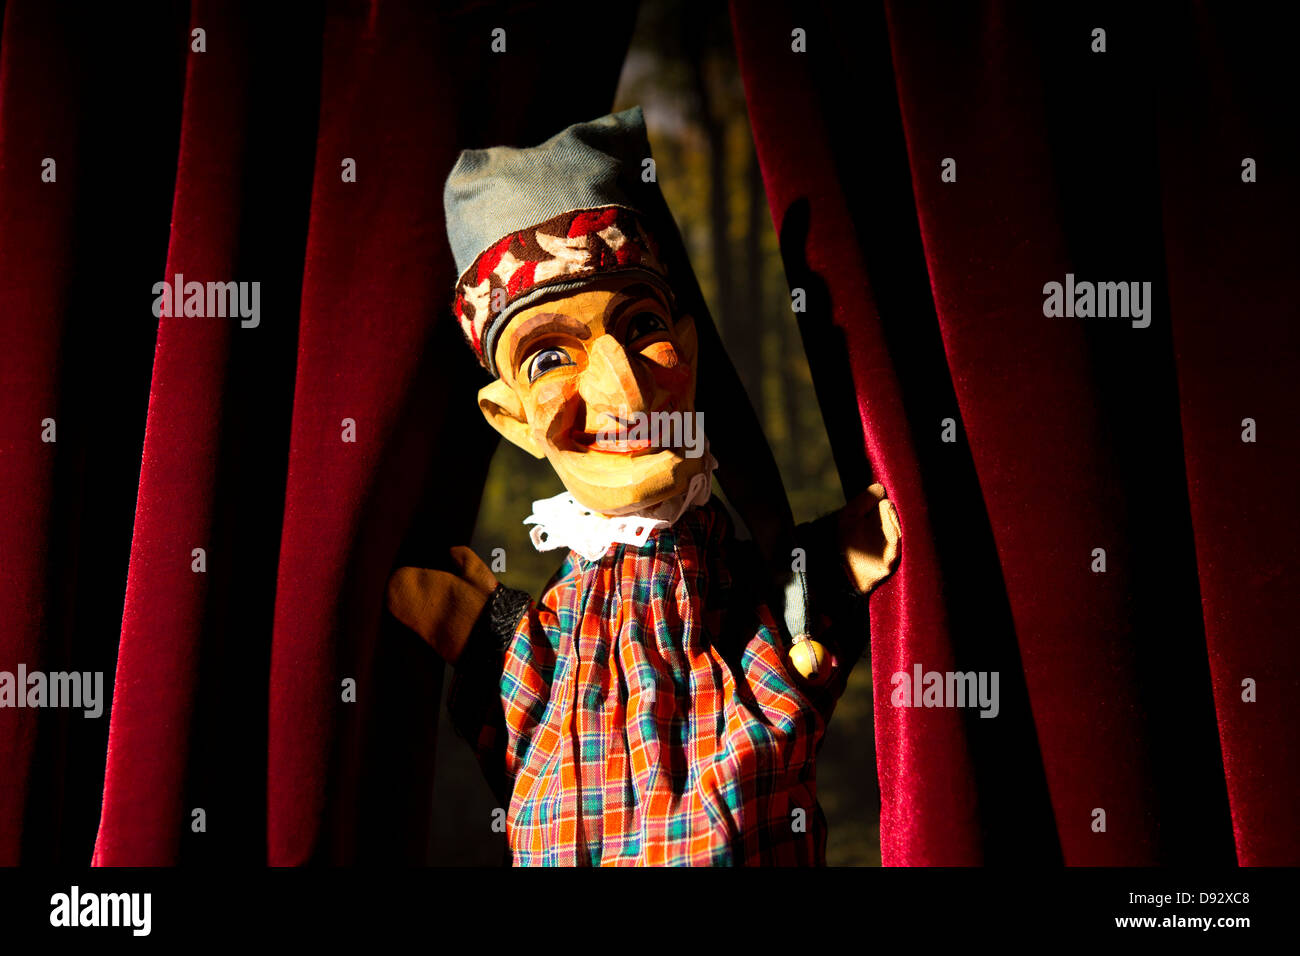 Punch from the classic puppet show Punch and Judy parting the curtains on stage Stock Photo